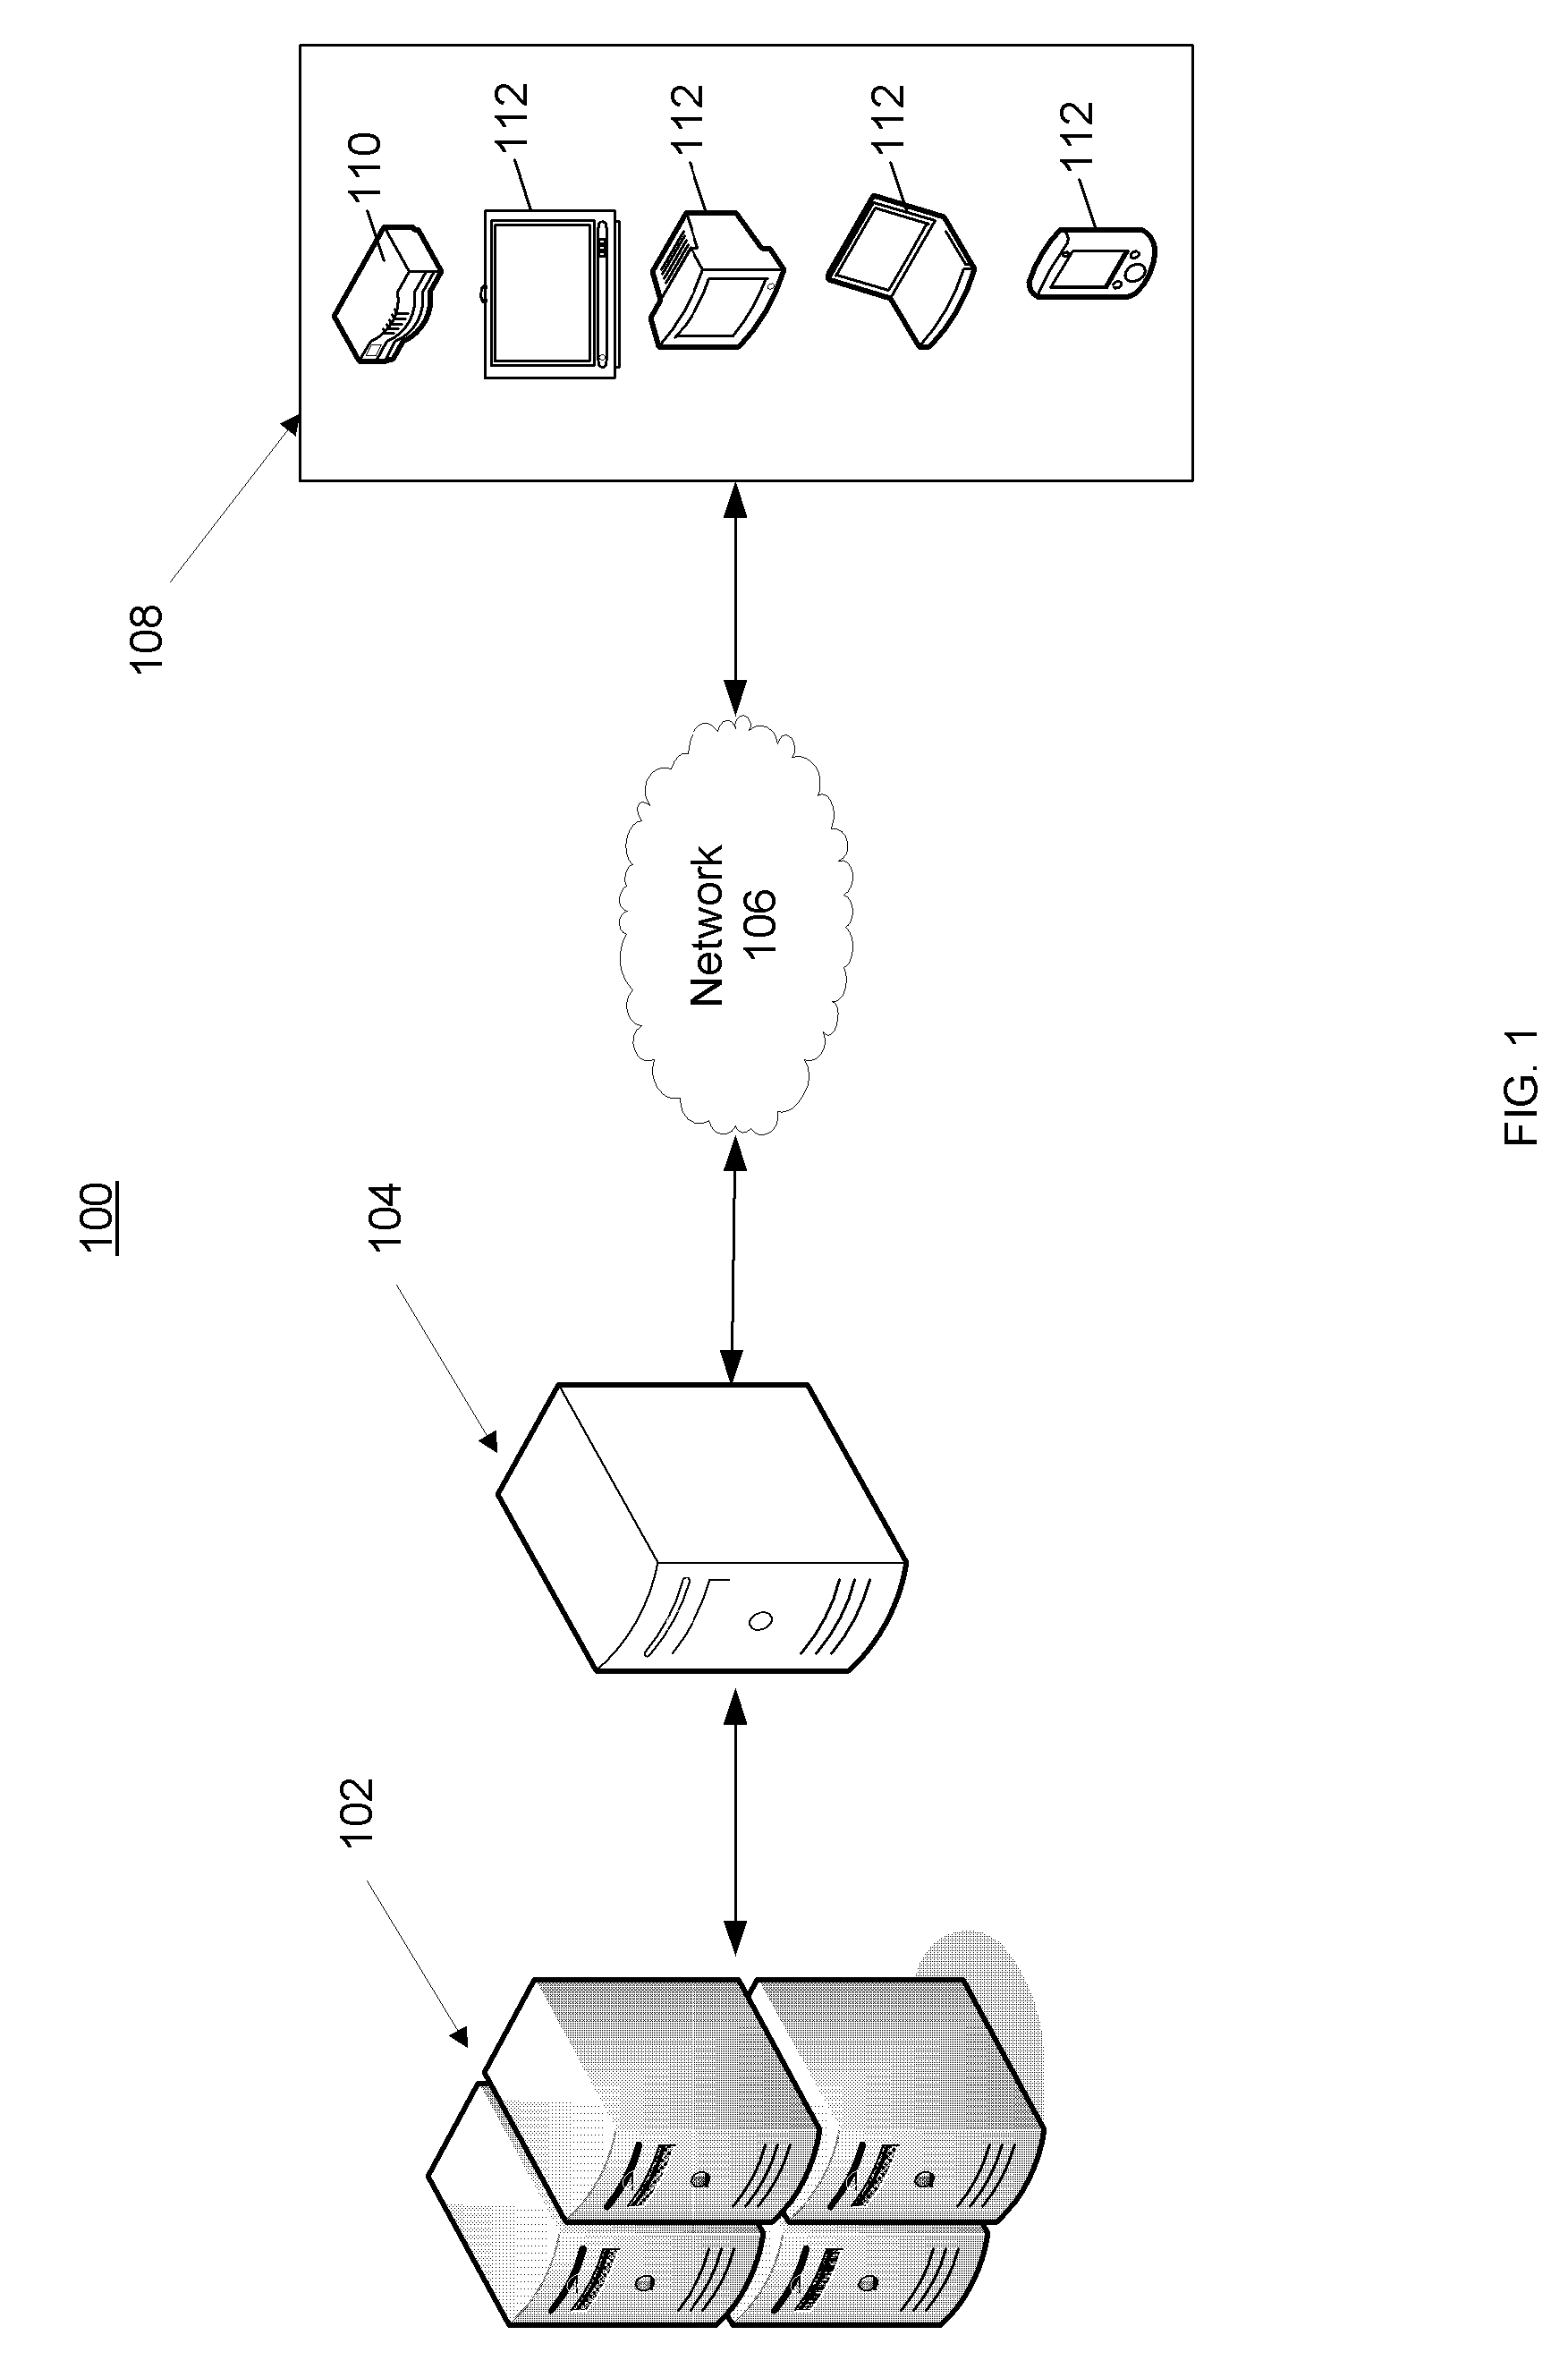 System and method for providing an interactive program guide having date and time toolbars